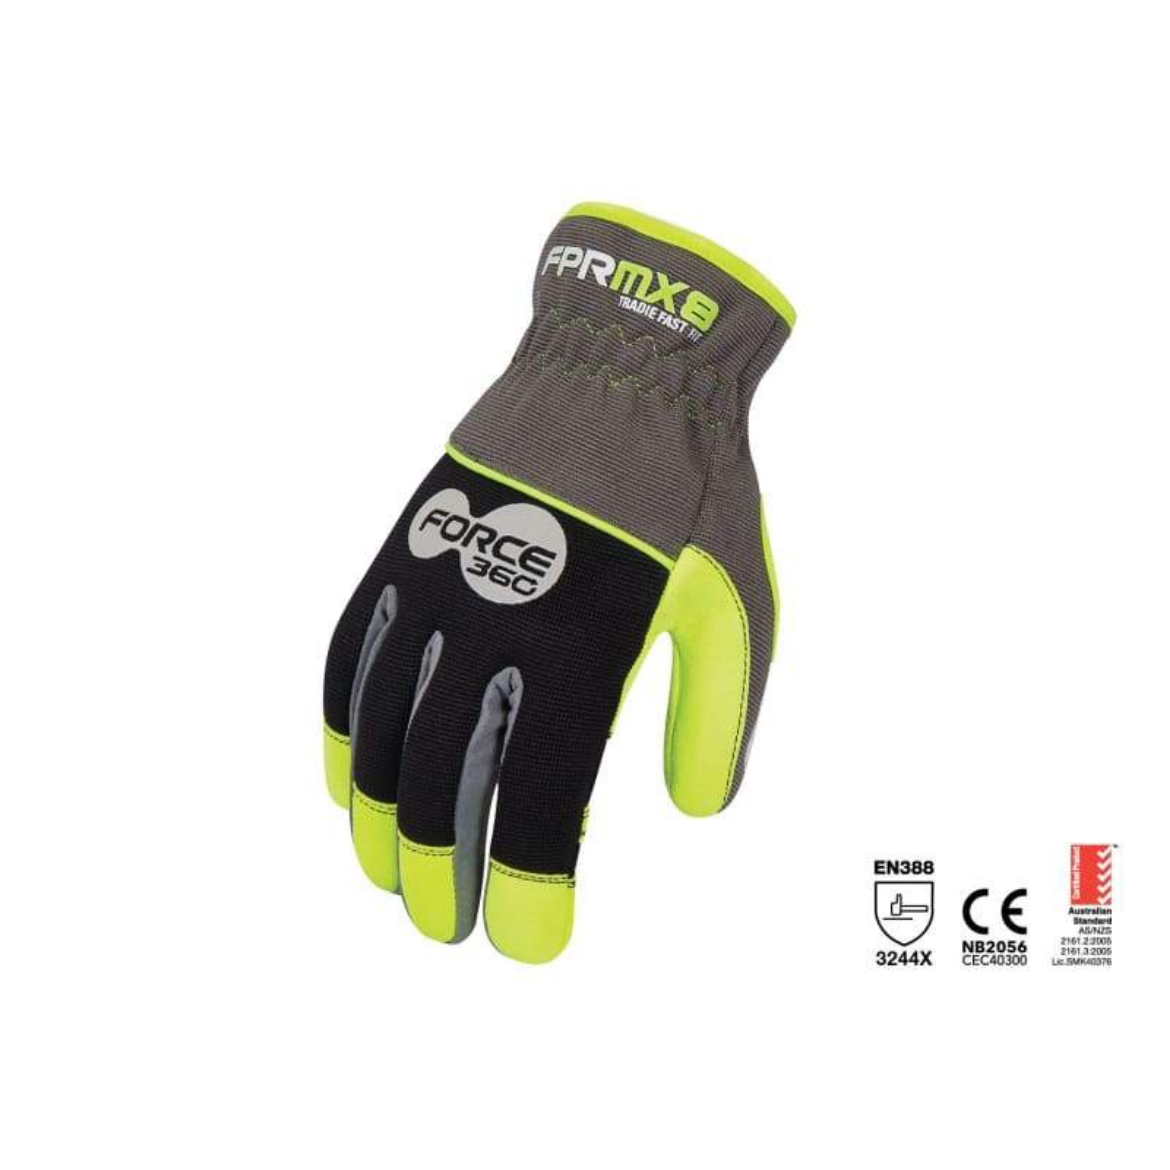 Picture of Force360 MX8 Tradie Fast Fit Rigger Mechanics Glove